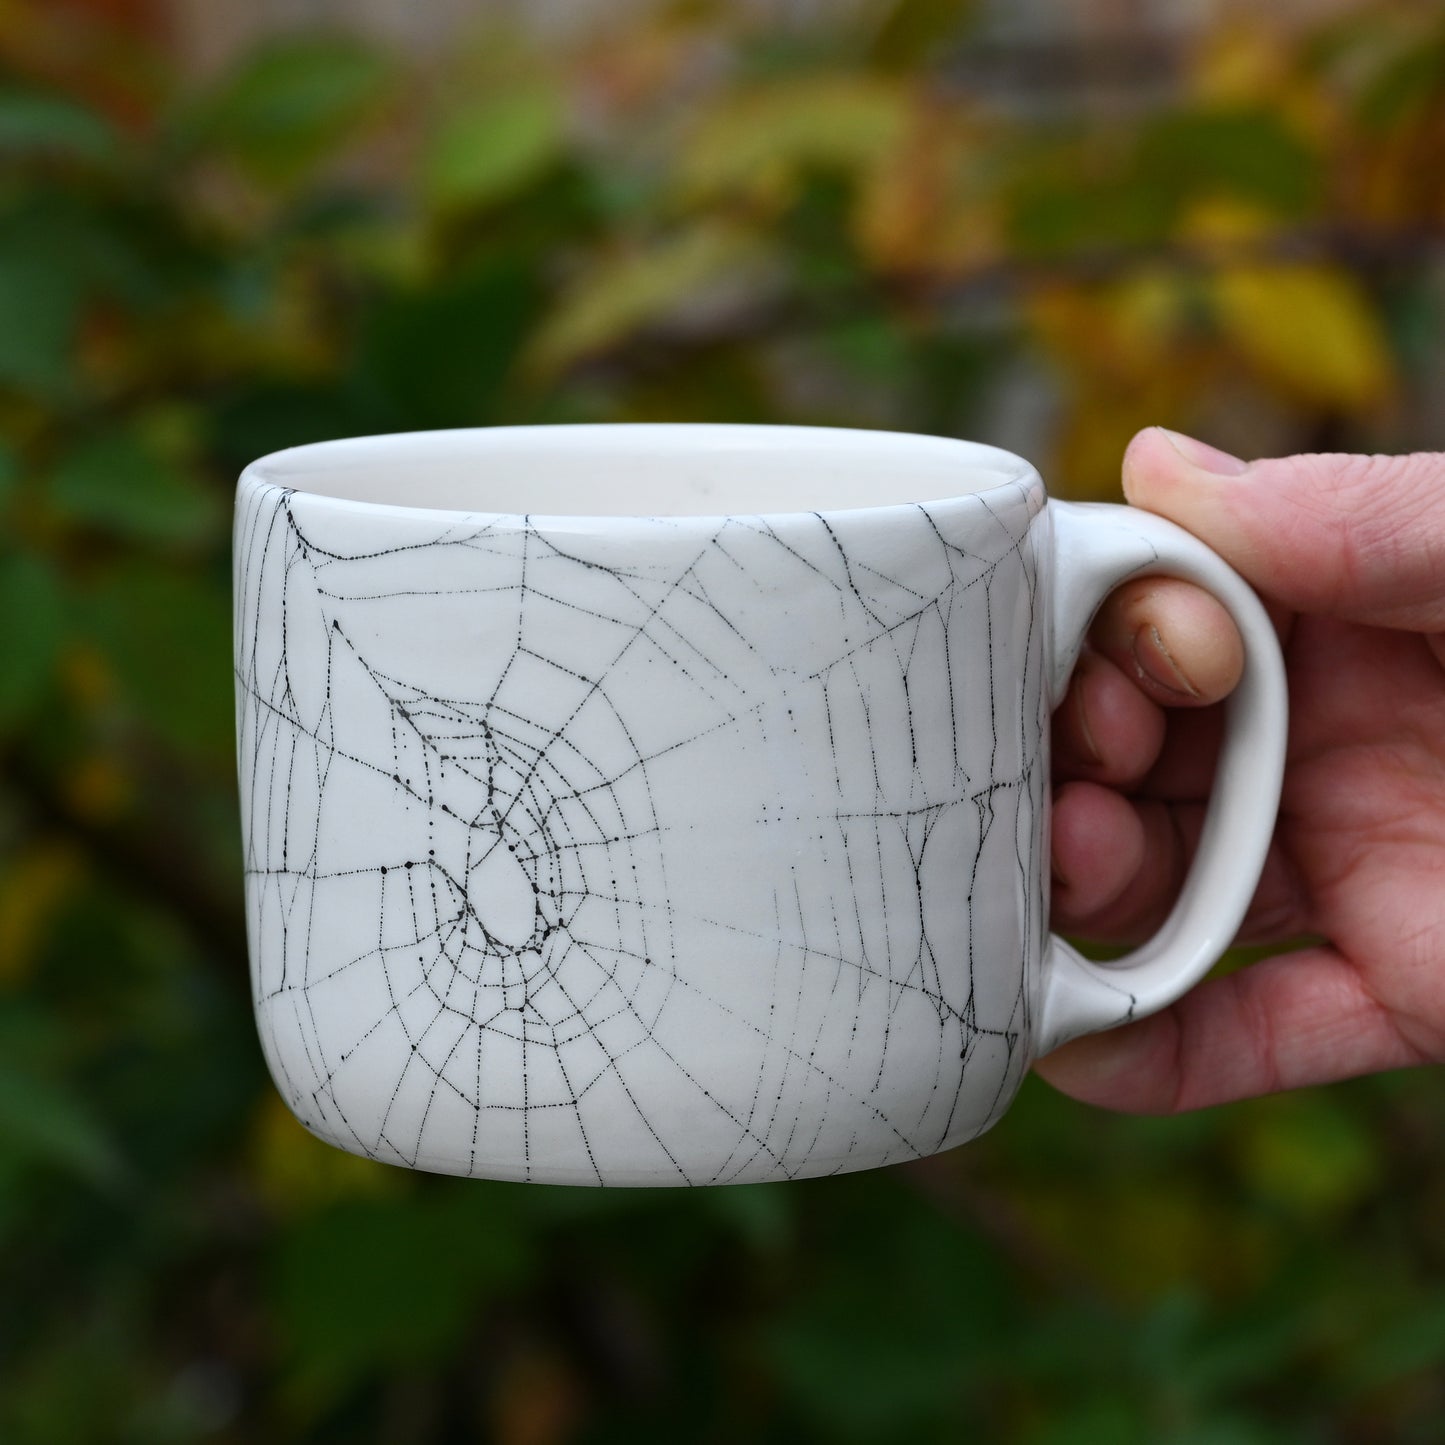 Web on Clay (248), Web Collected October 30, 2022